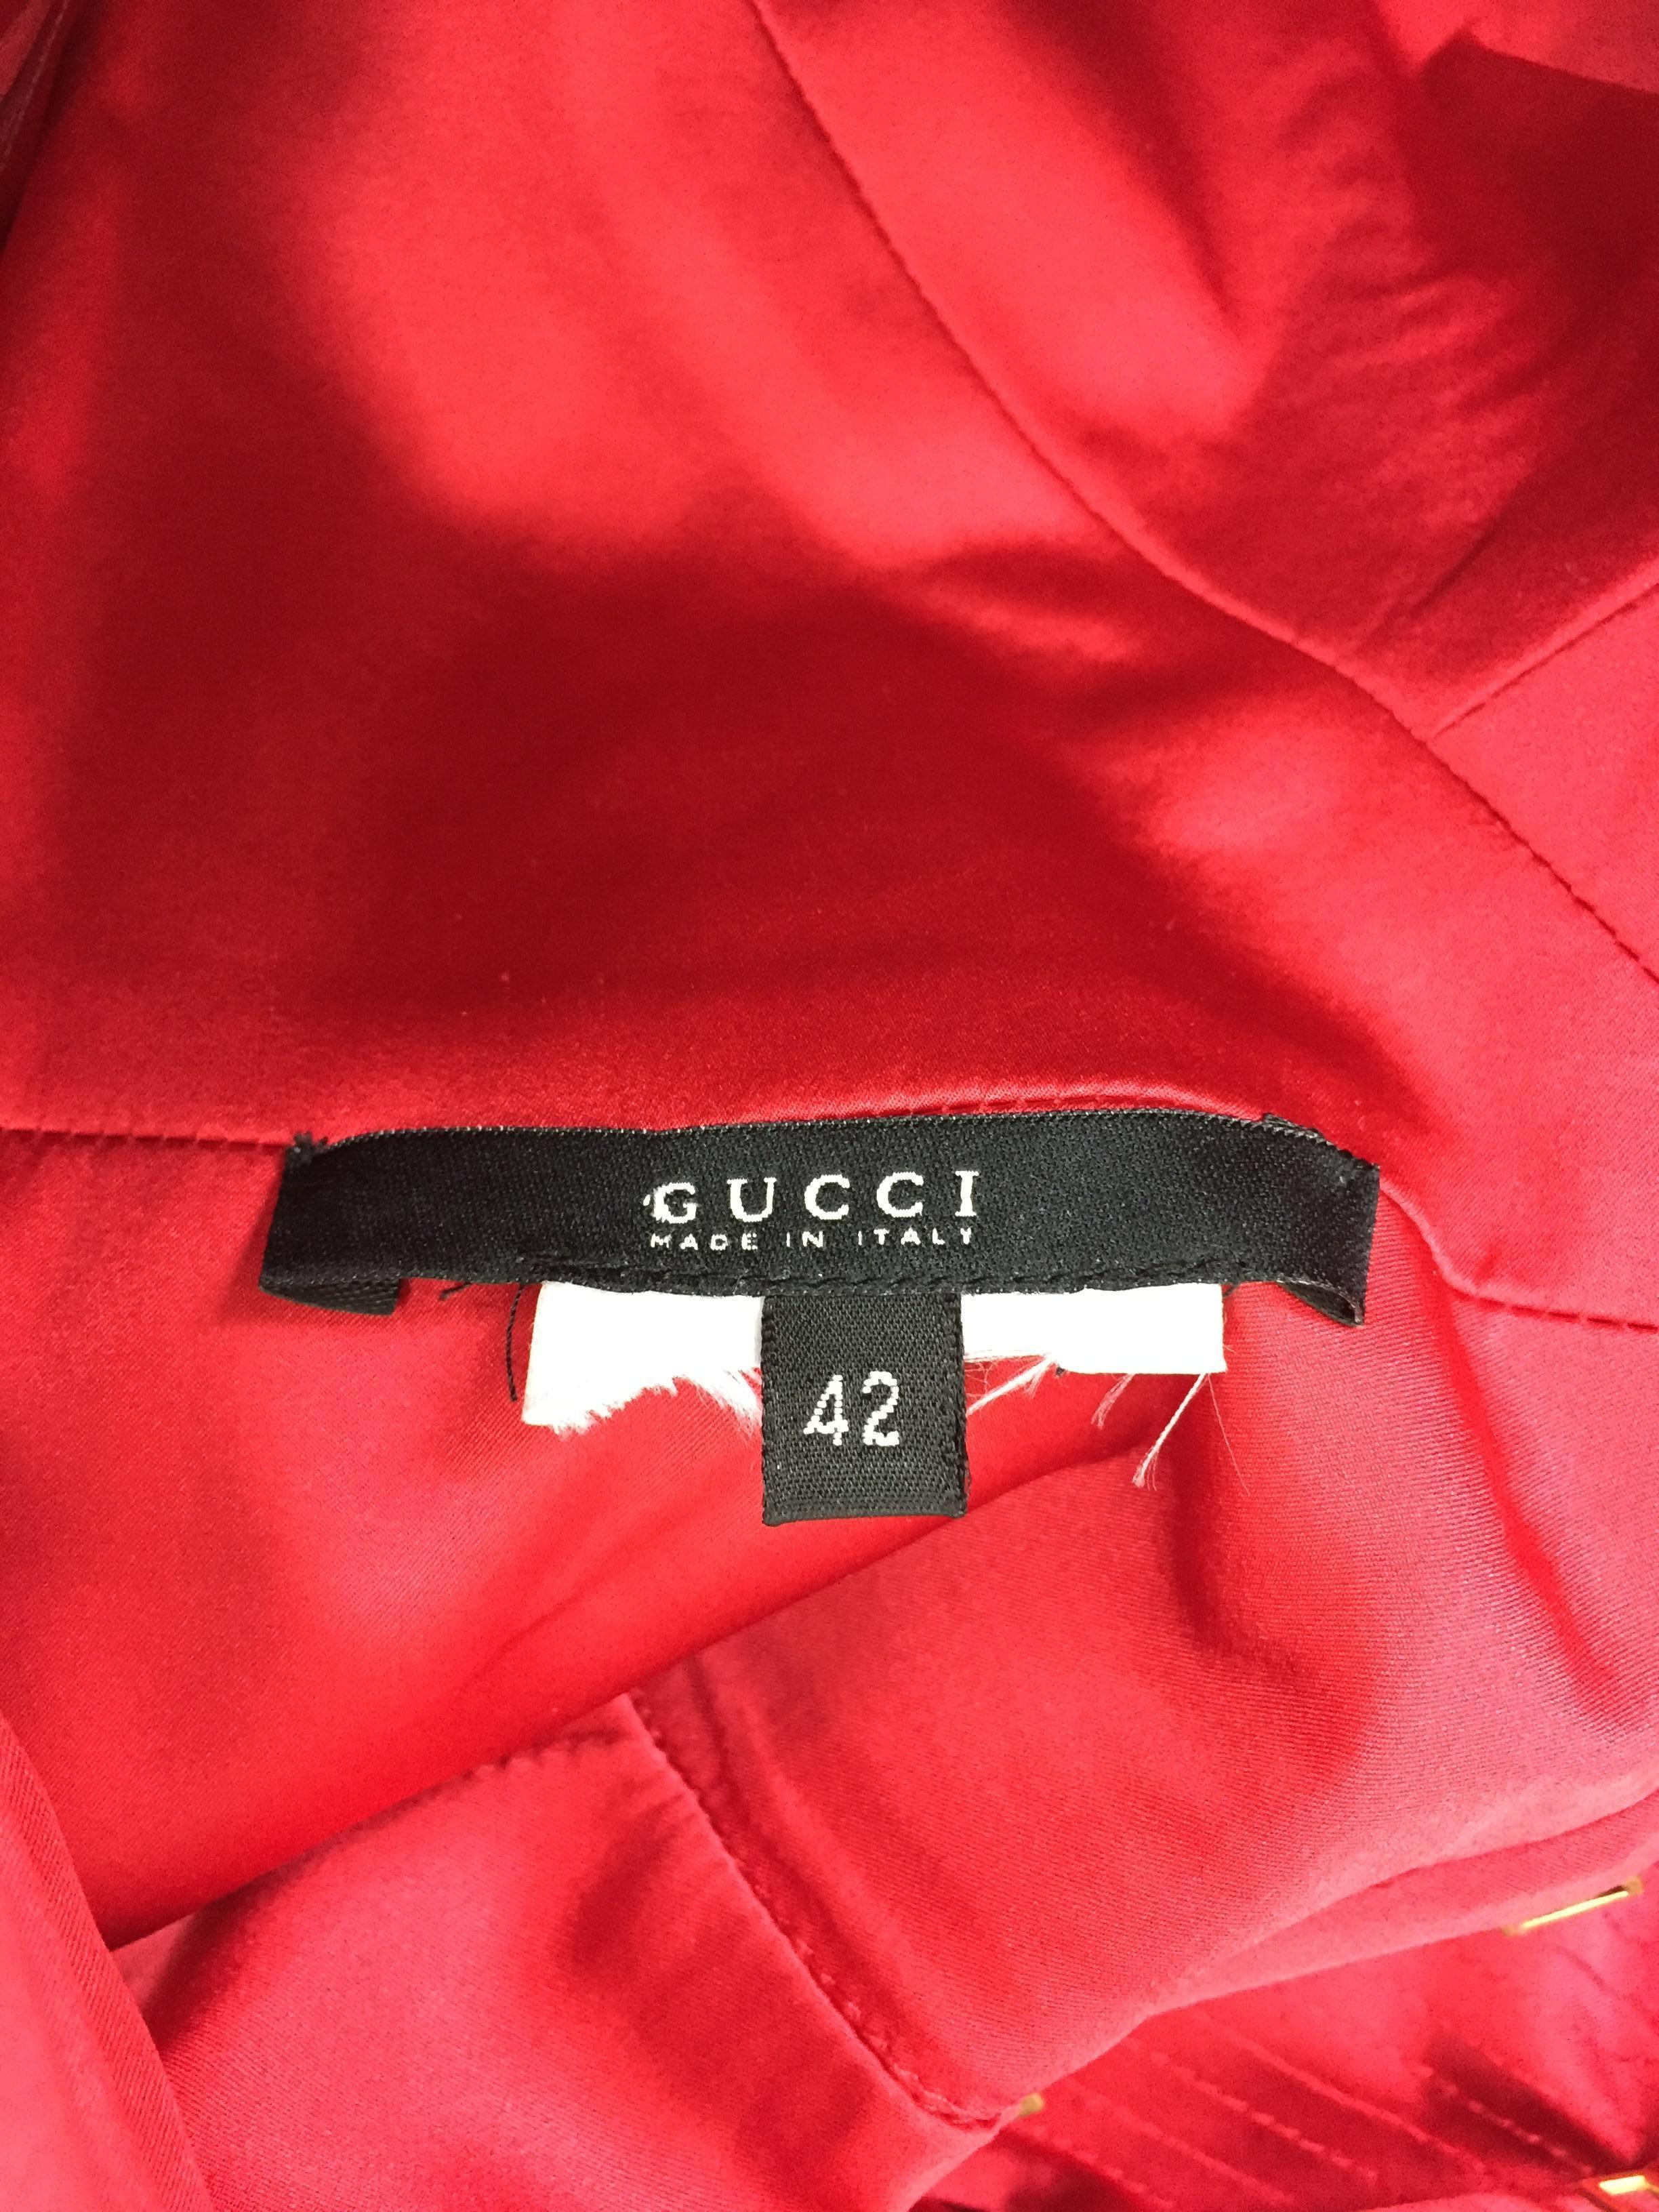 tom ford gucci 2003 red dress